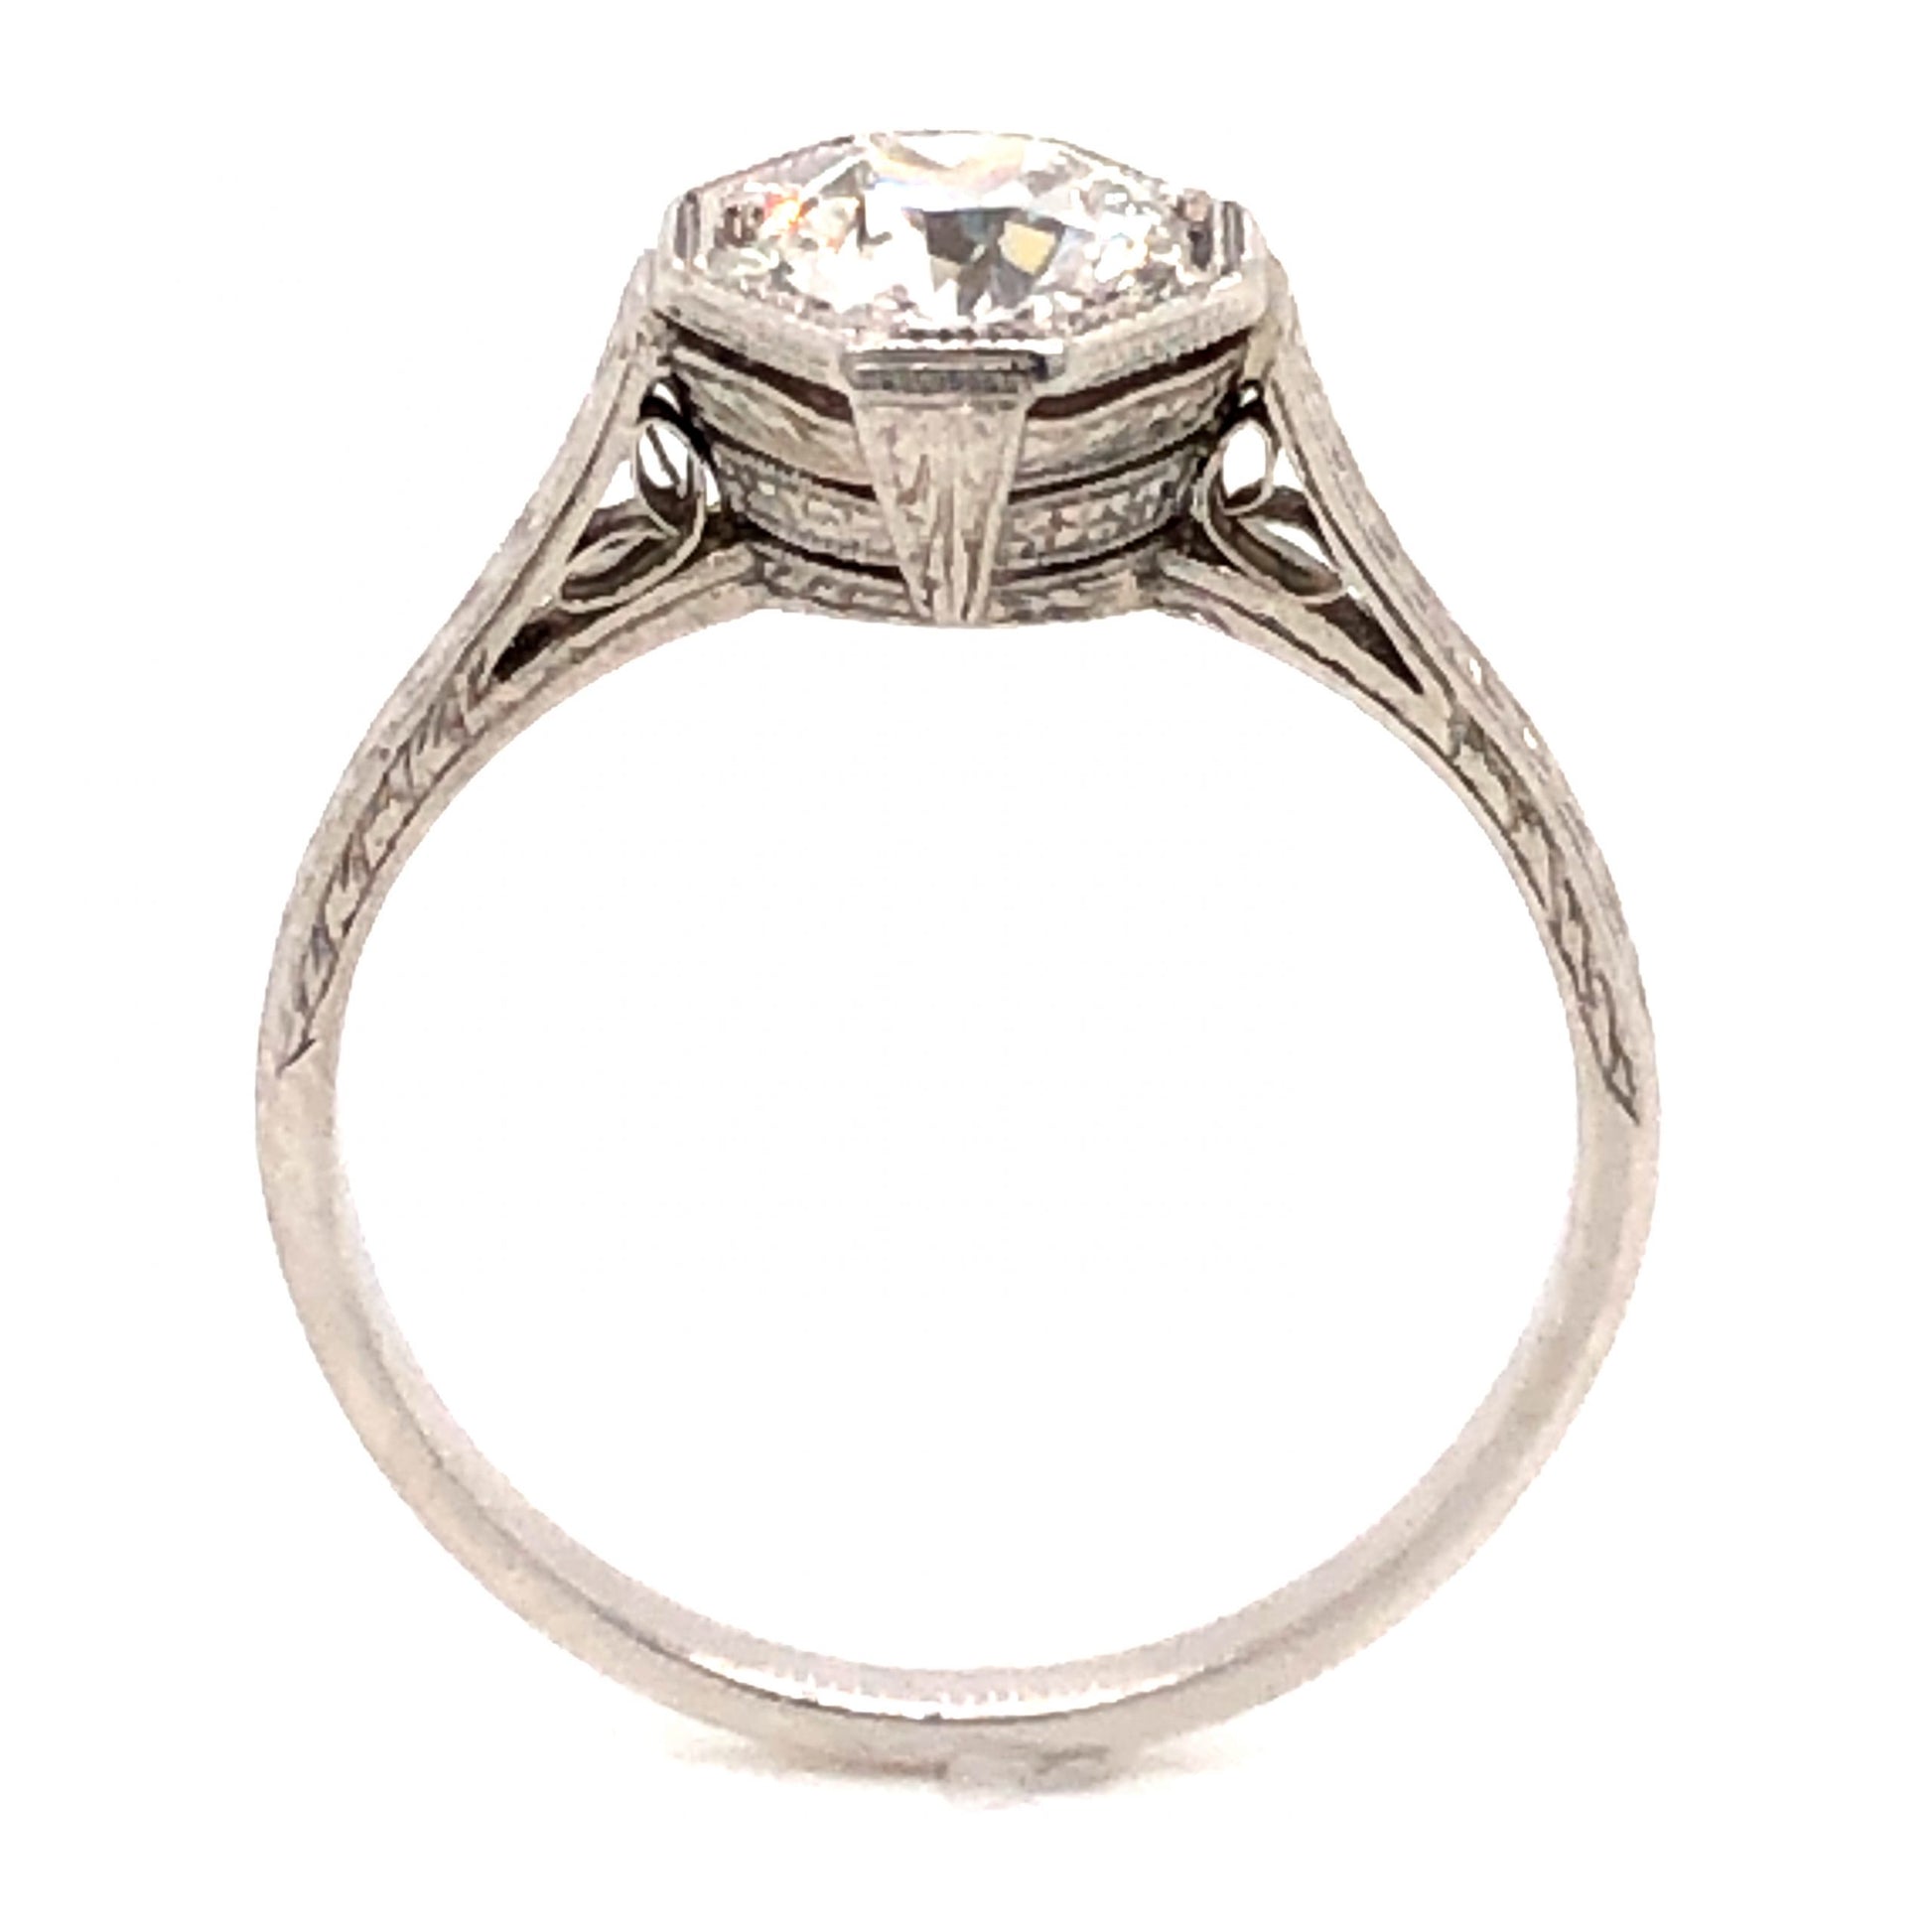 .85 Art Deco Diamond Engagement Ring in PlatinumComposition: PlatinumRing Size: 5.75Total Diamond Weight: .85 ctTotal Gram Weight: 3.0 g